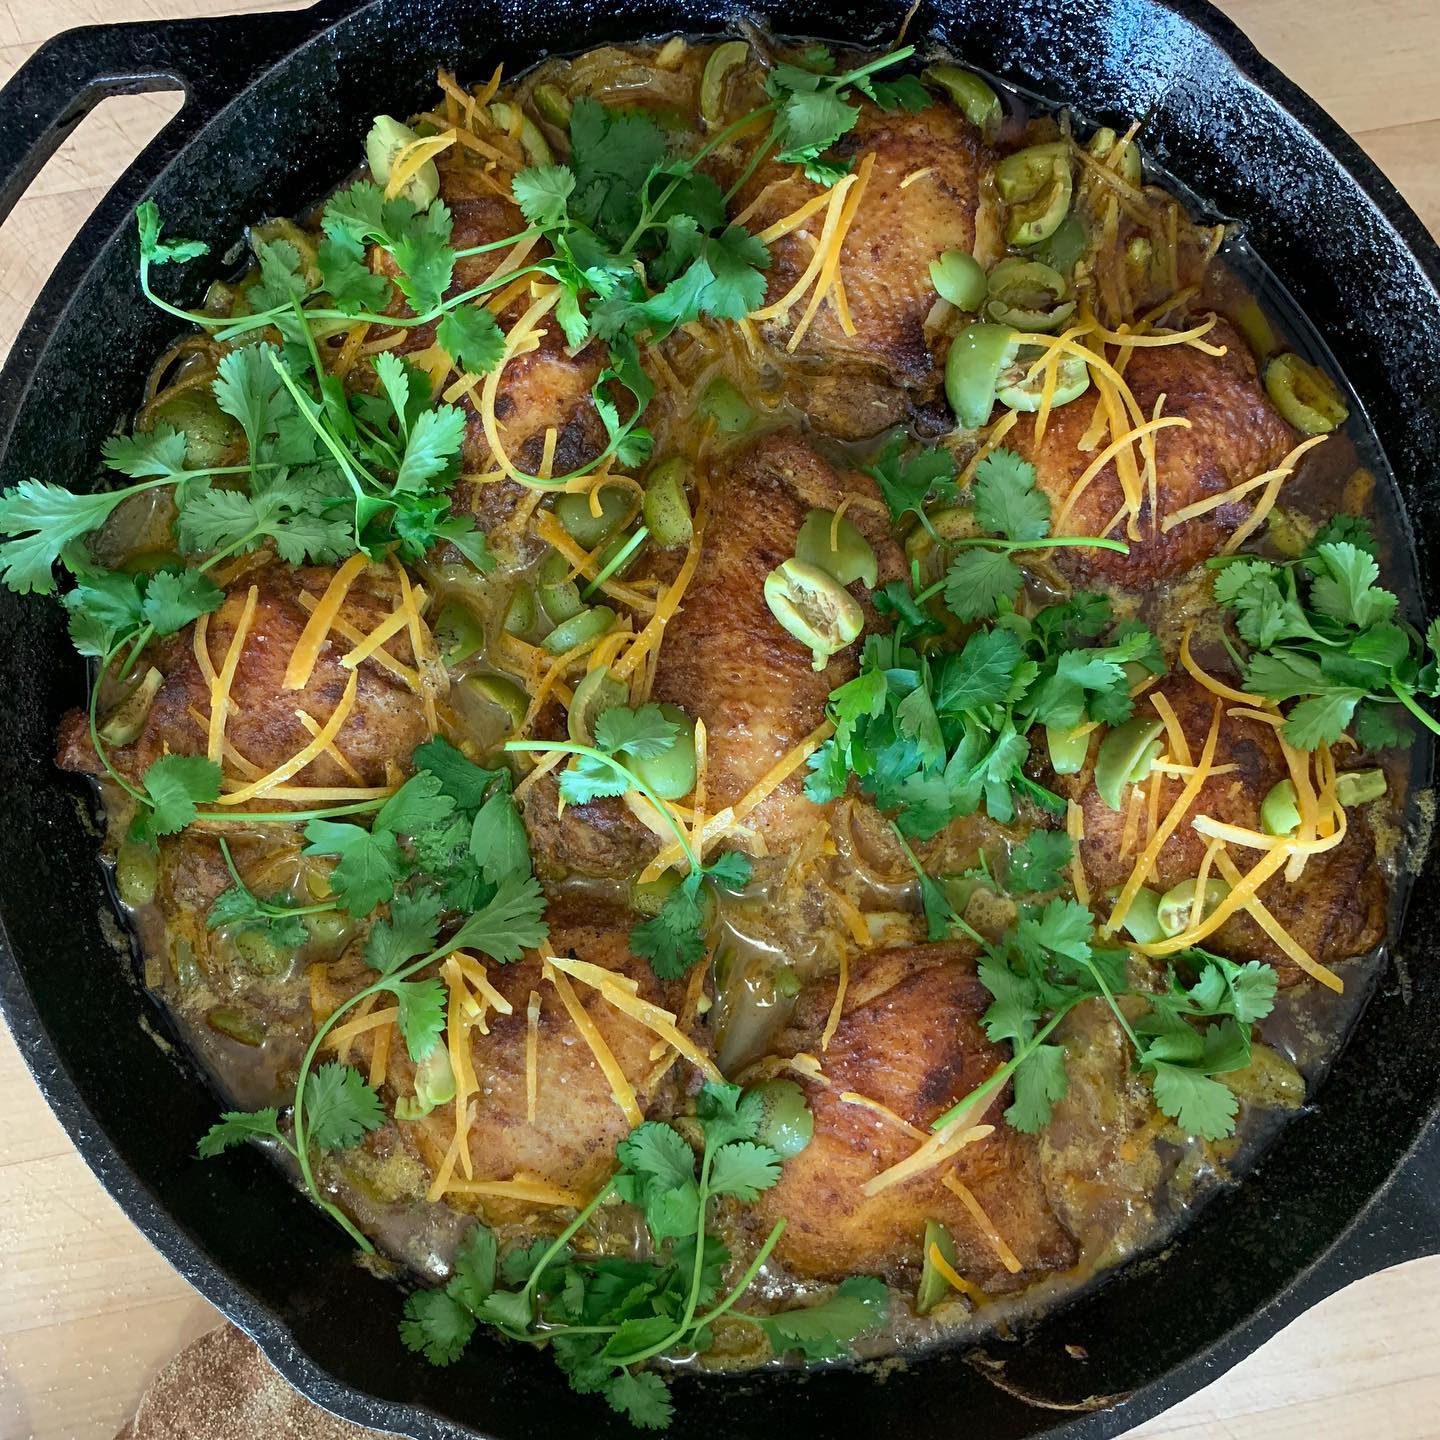 There’s still time to book your holiday HOG event and prepare crazy delicious food like this tagine from our Morocco menu.